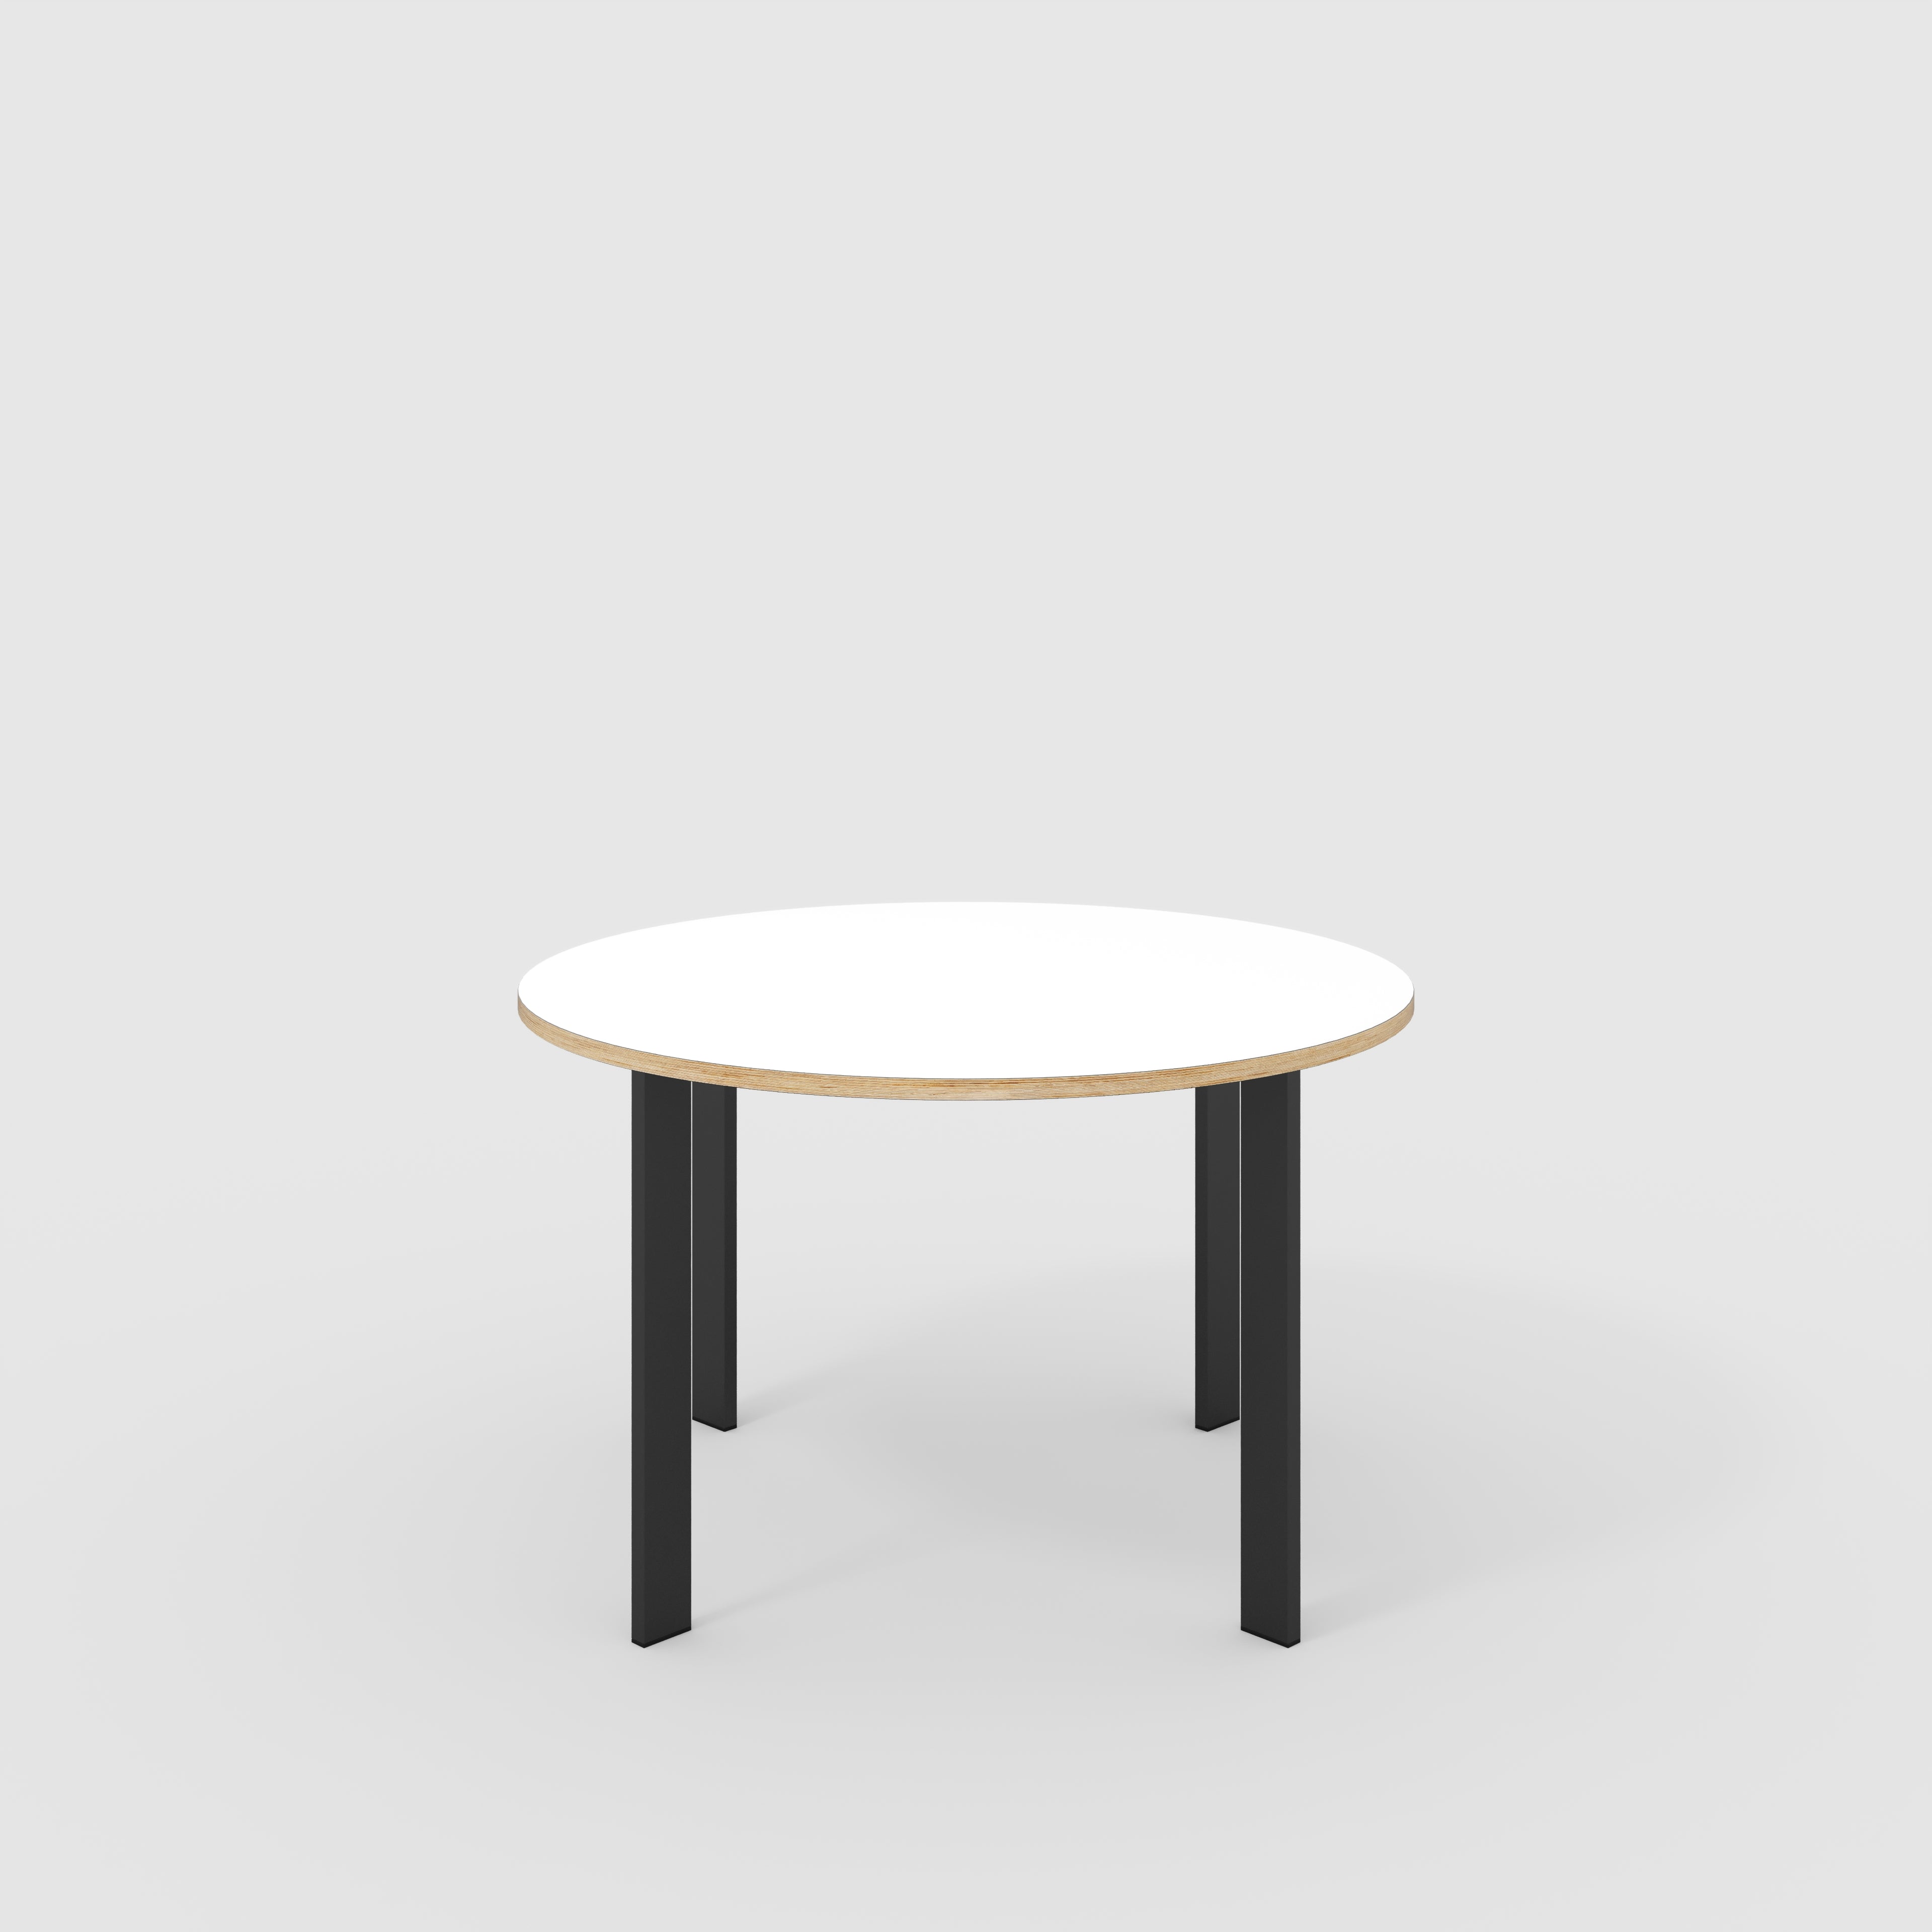 Round Table with Black Rectangular Single Pin Legs - Formica White - 1200(dia) x 750(h)